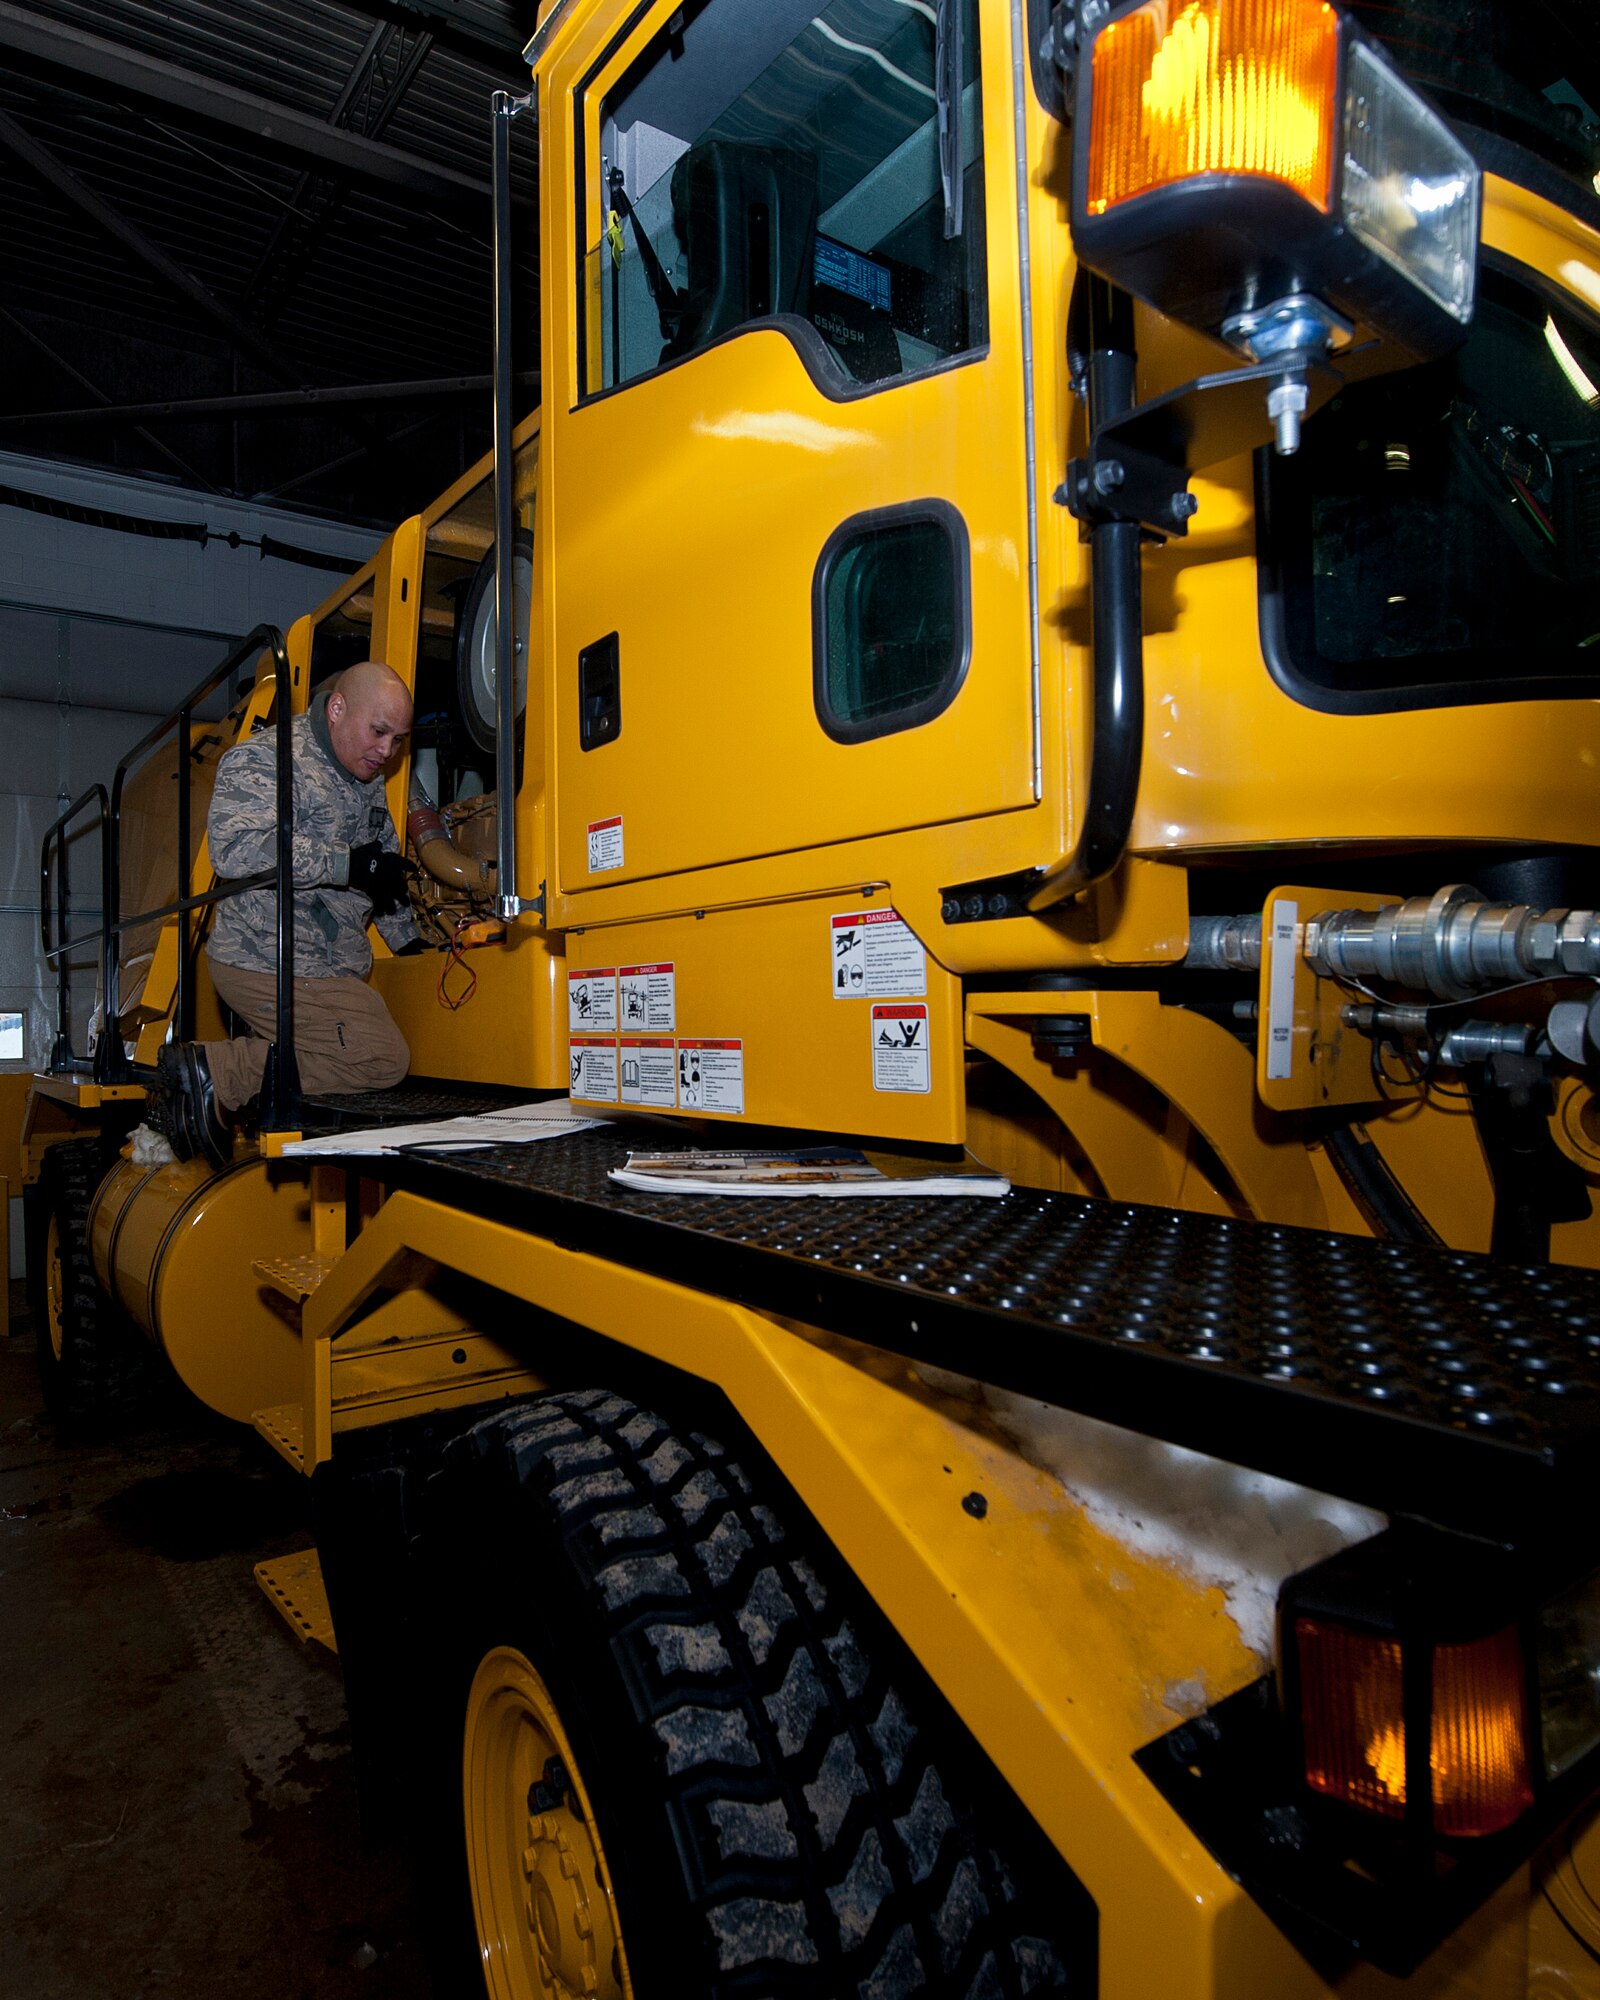 Staff Sgt. Jason Montano, 5th Logistics Readiness Squadron vehicle maintenance technician, troubleshoots a snow blower vehicle at Minot Air Force Base, N.D., Jan. 4, 2017. The 5 LRS special purpose shop maintainers work on various components of government vehicles, such as electrical systems, brakes, transmissions, and heating and cooling systems. (U.S. Air Force photo/Airman 1st Class Jonathan McElderry)